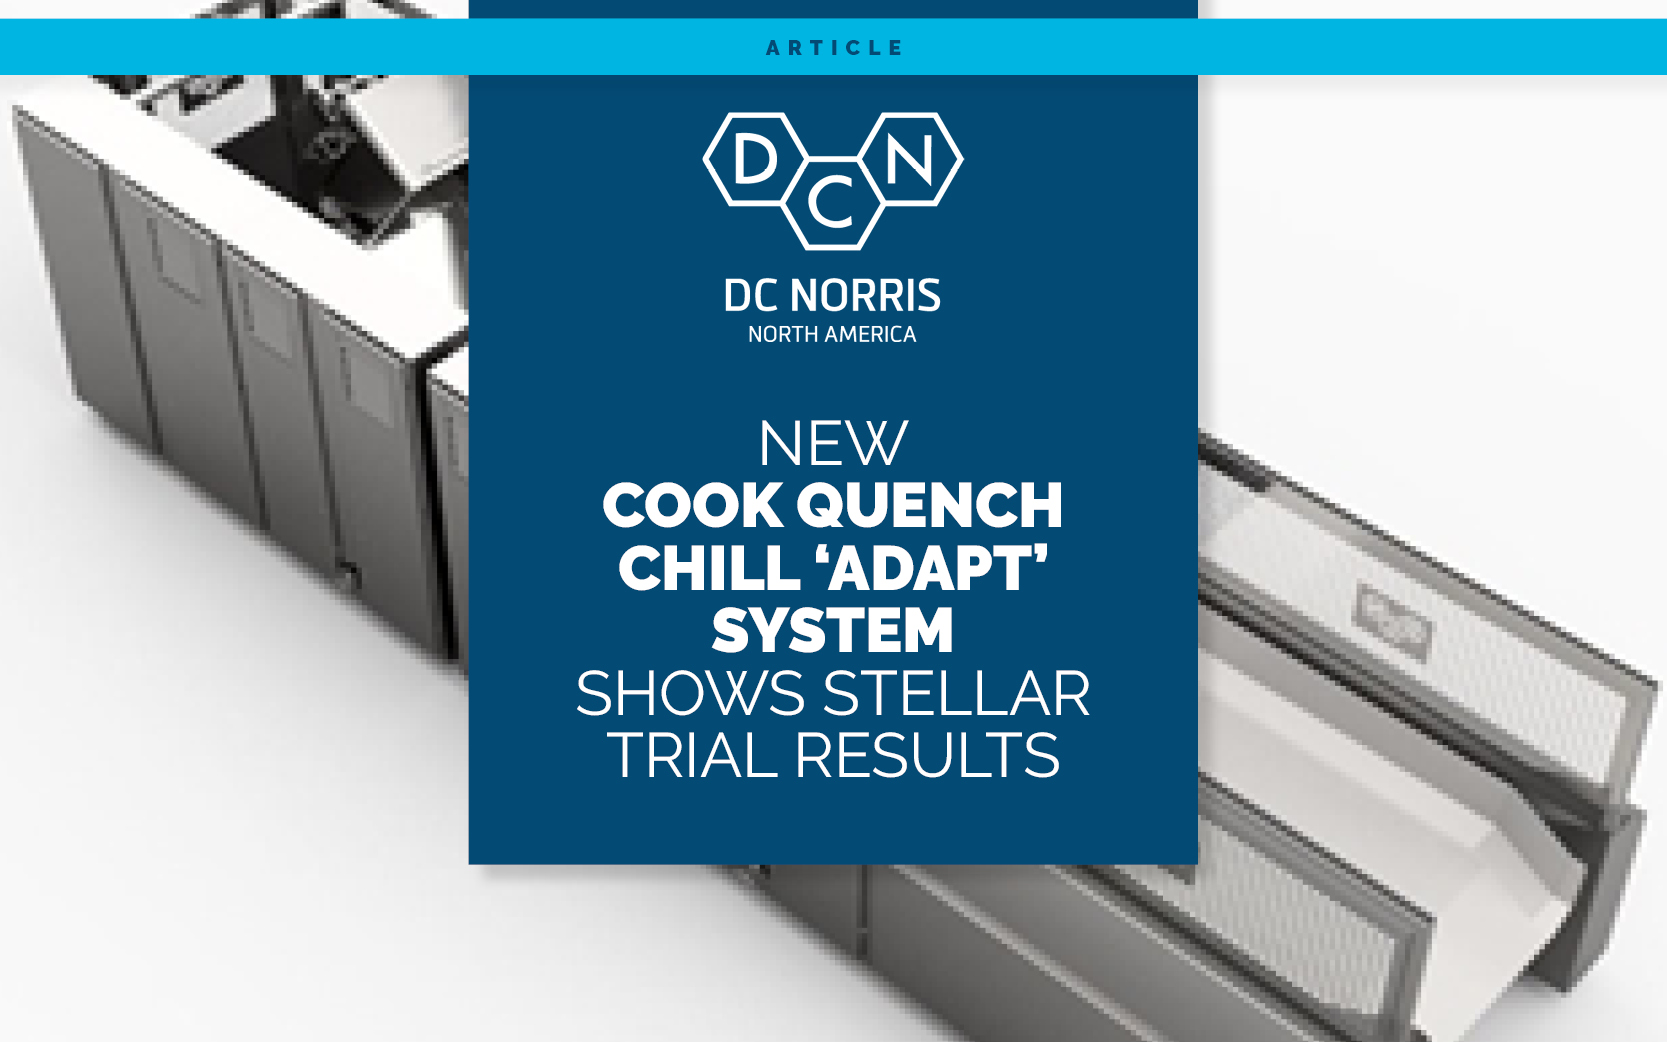 dc norris cook quench chill adapt system in the background with the title 'Cook Quench Chill Adapt System Shows Stellar Trial Results'